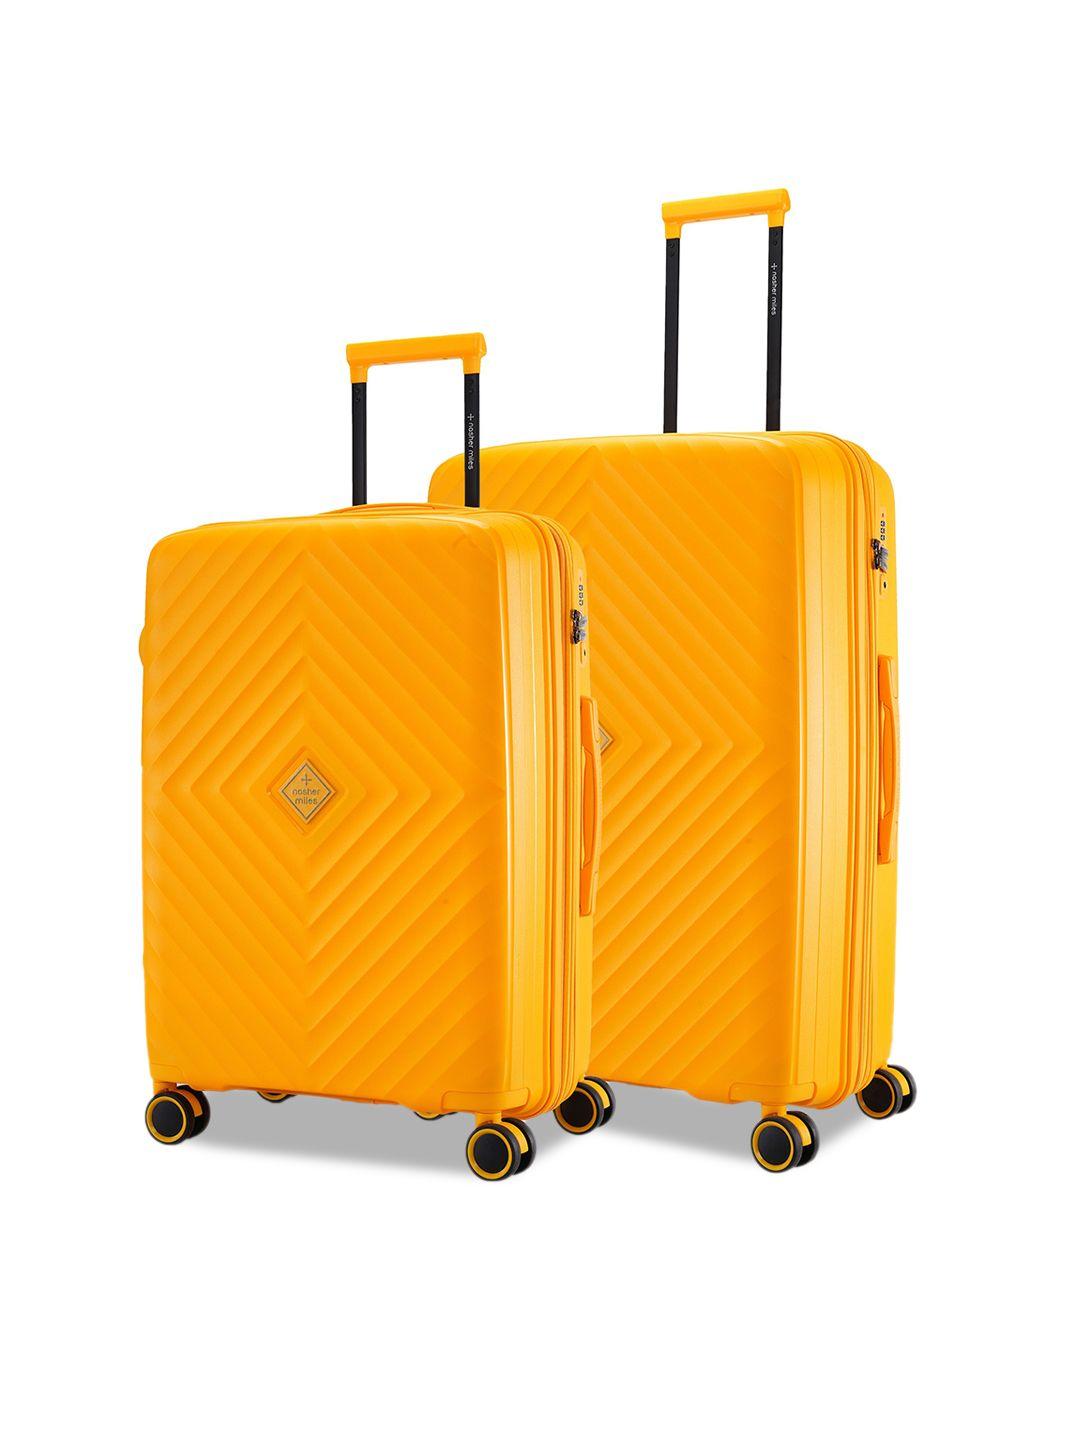 nasher miles set of 2 hard-sided trolley suitcases